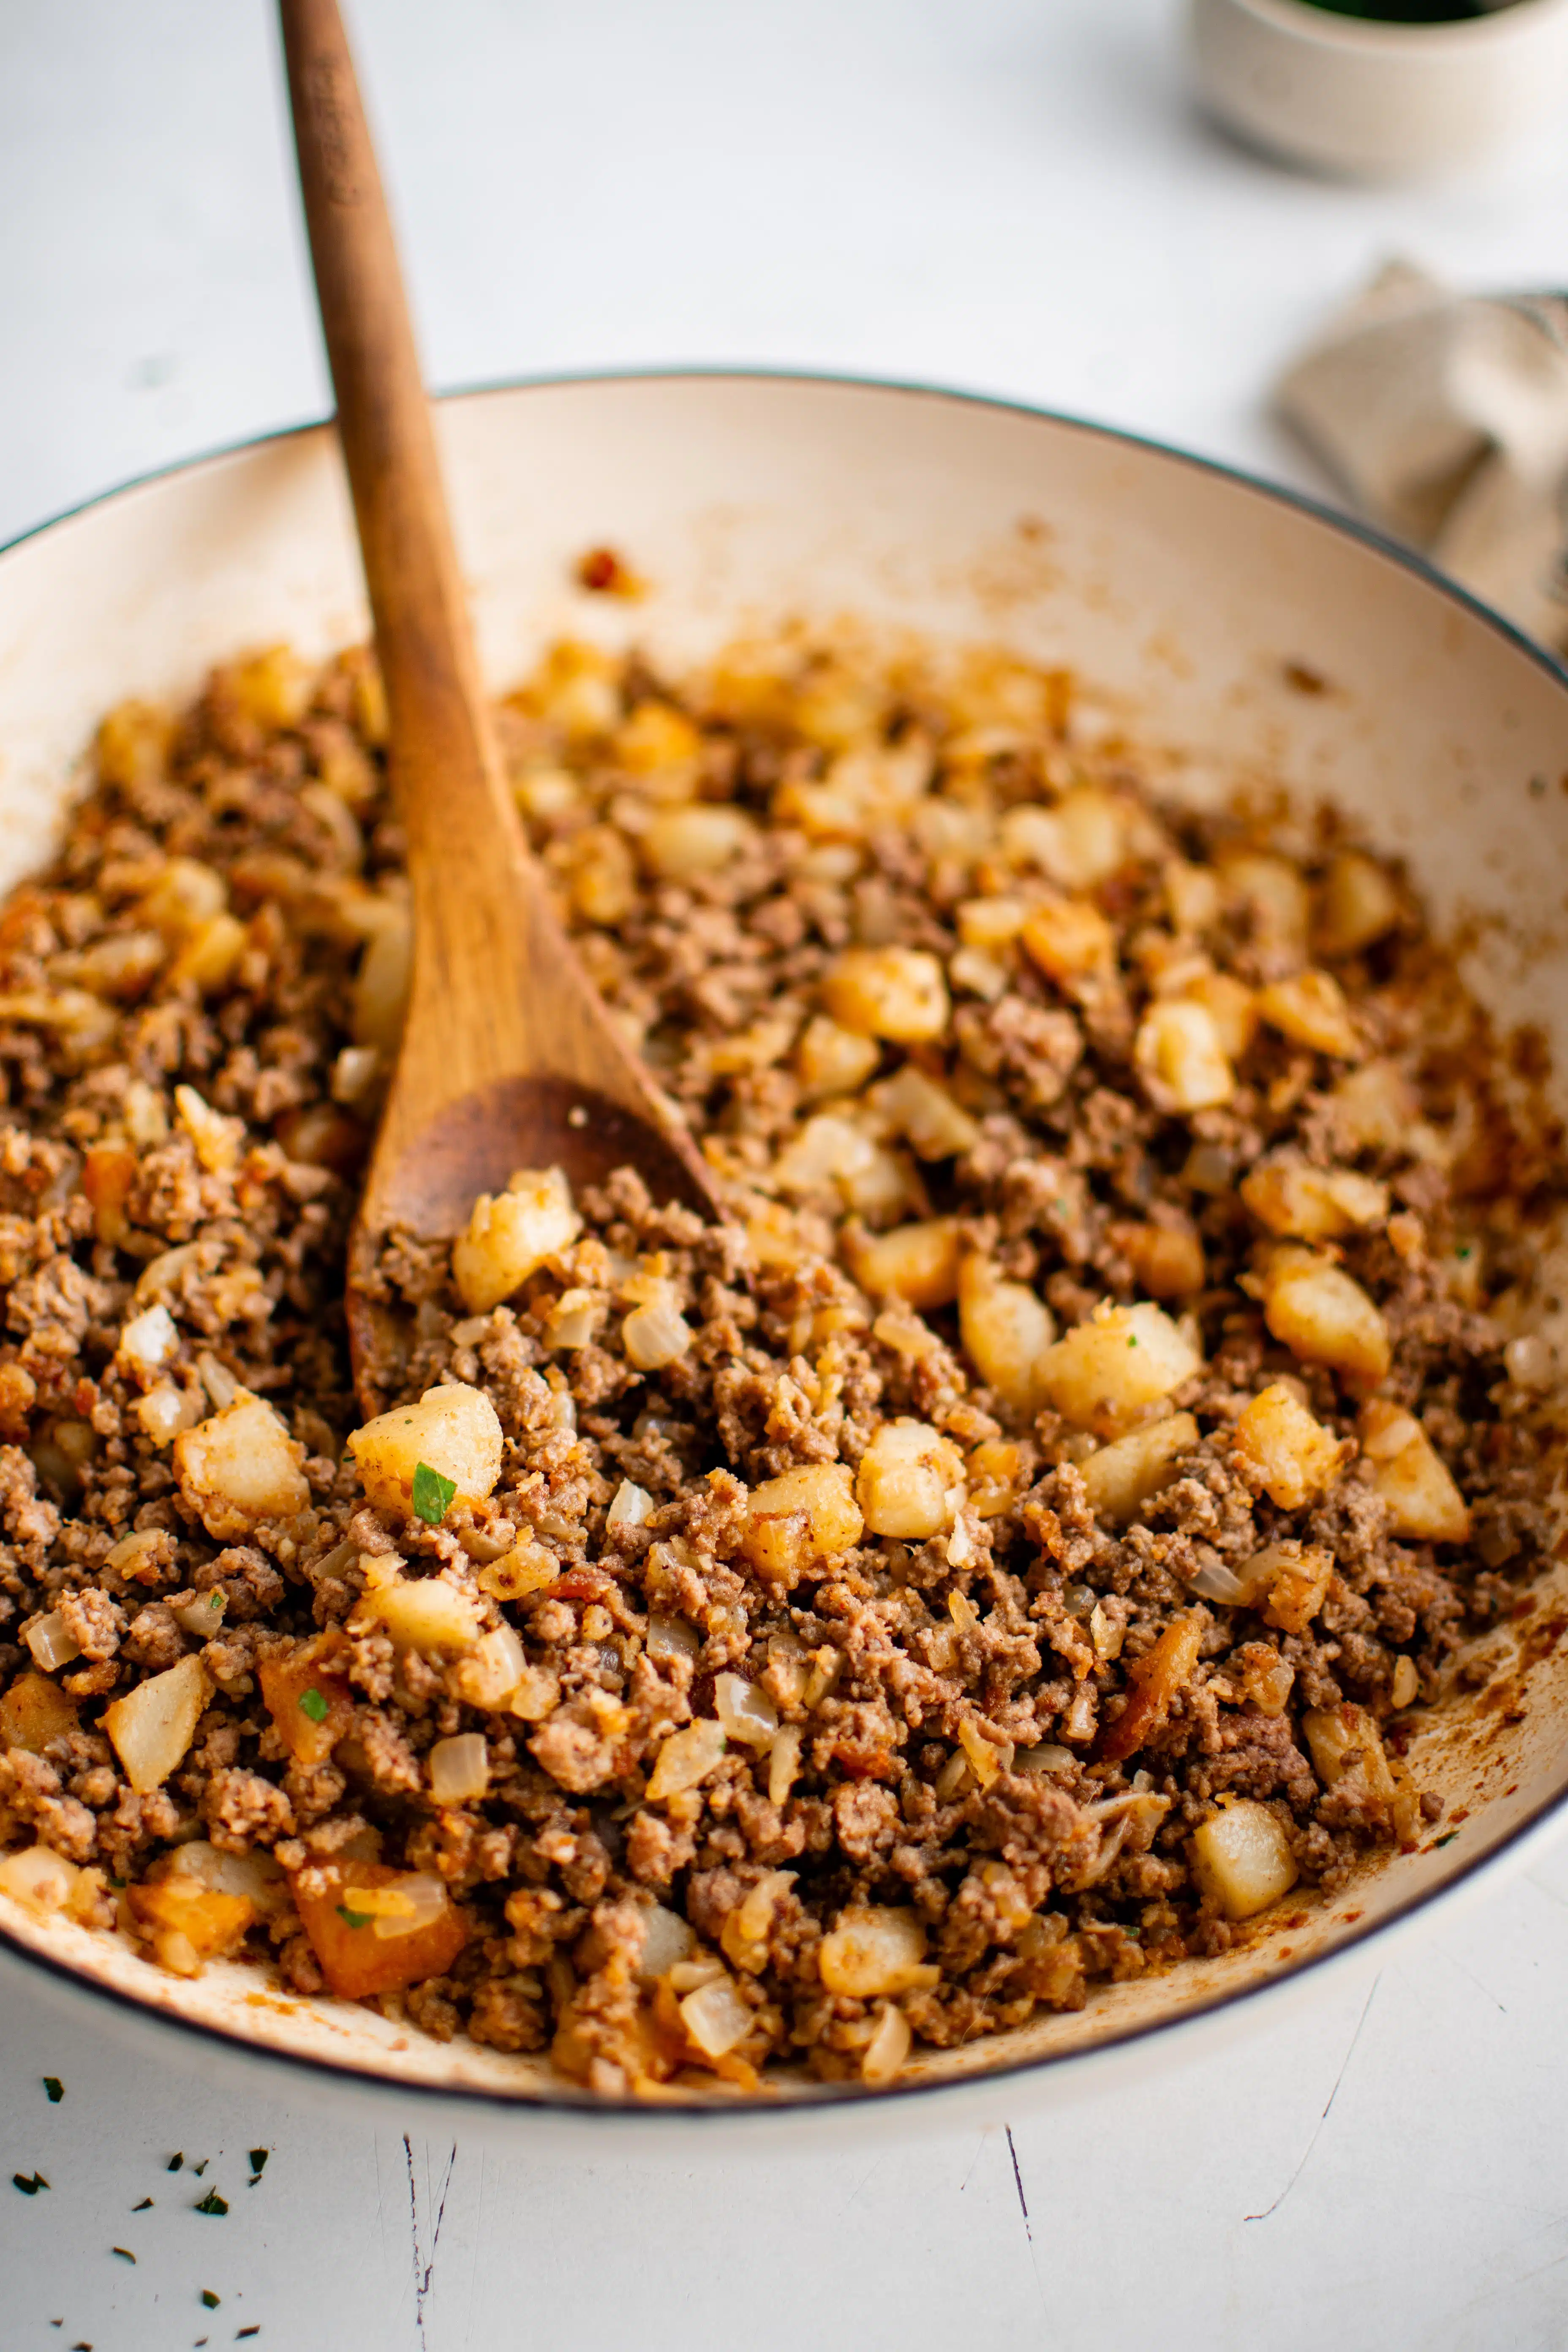 Large skillet filled with cooked ground beef with onion and diced potatoes.